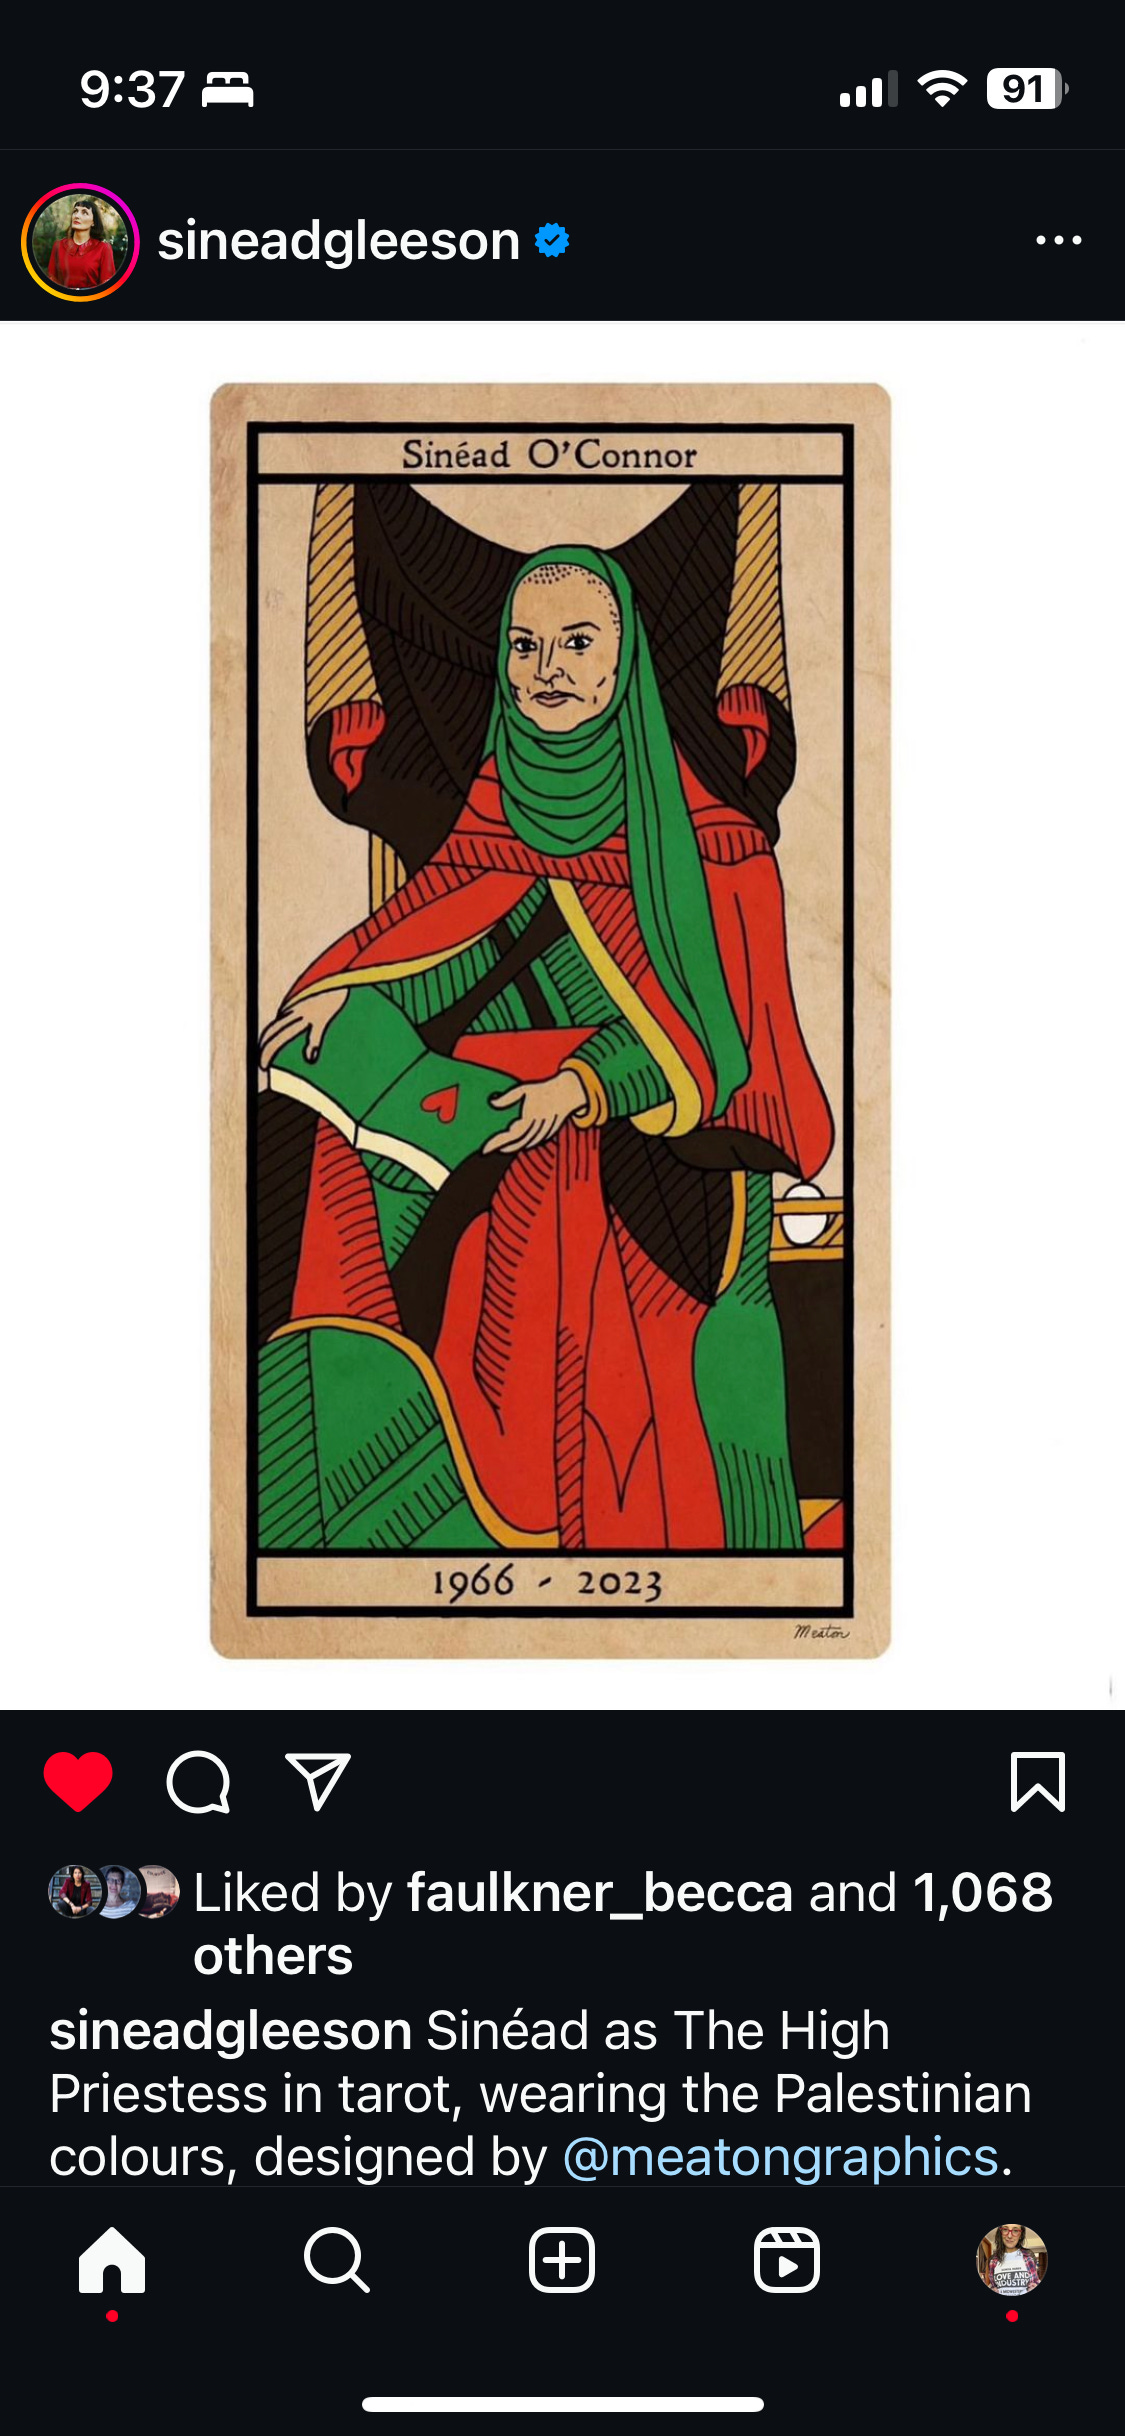 Image of a print of Sinead O'Connor in red and green robes as the high priestess of tarot.